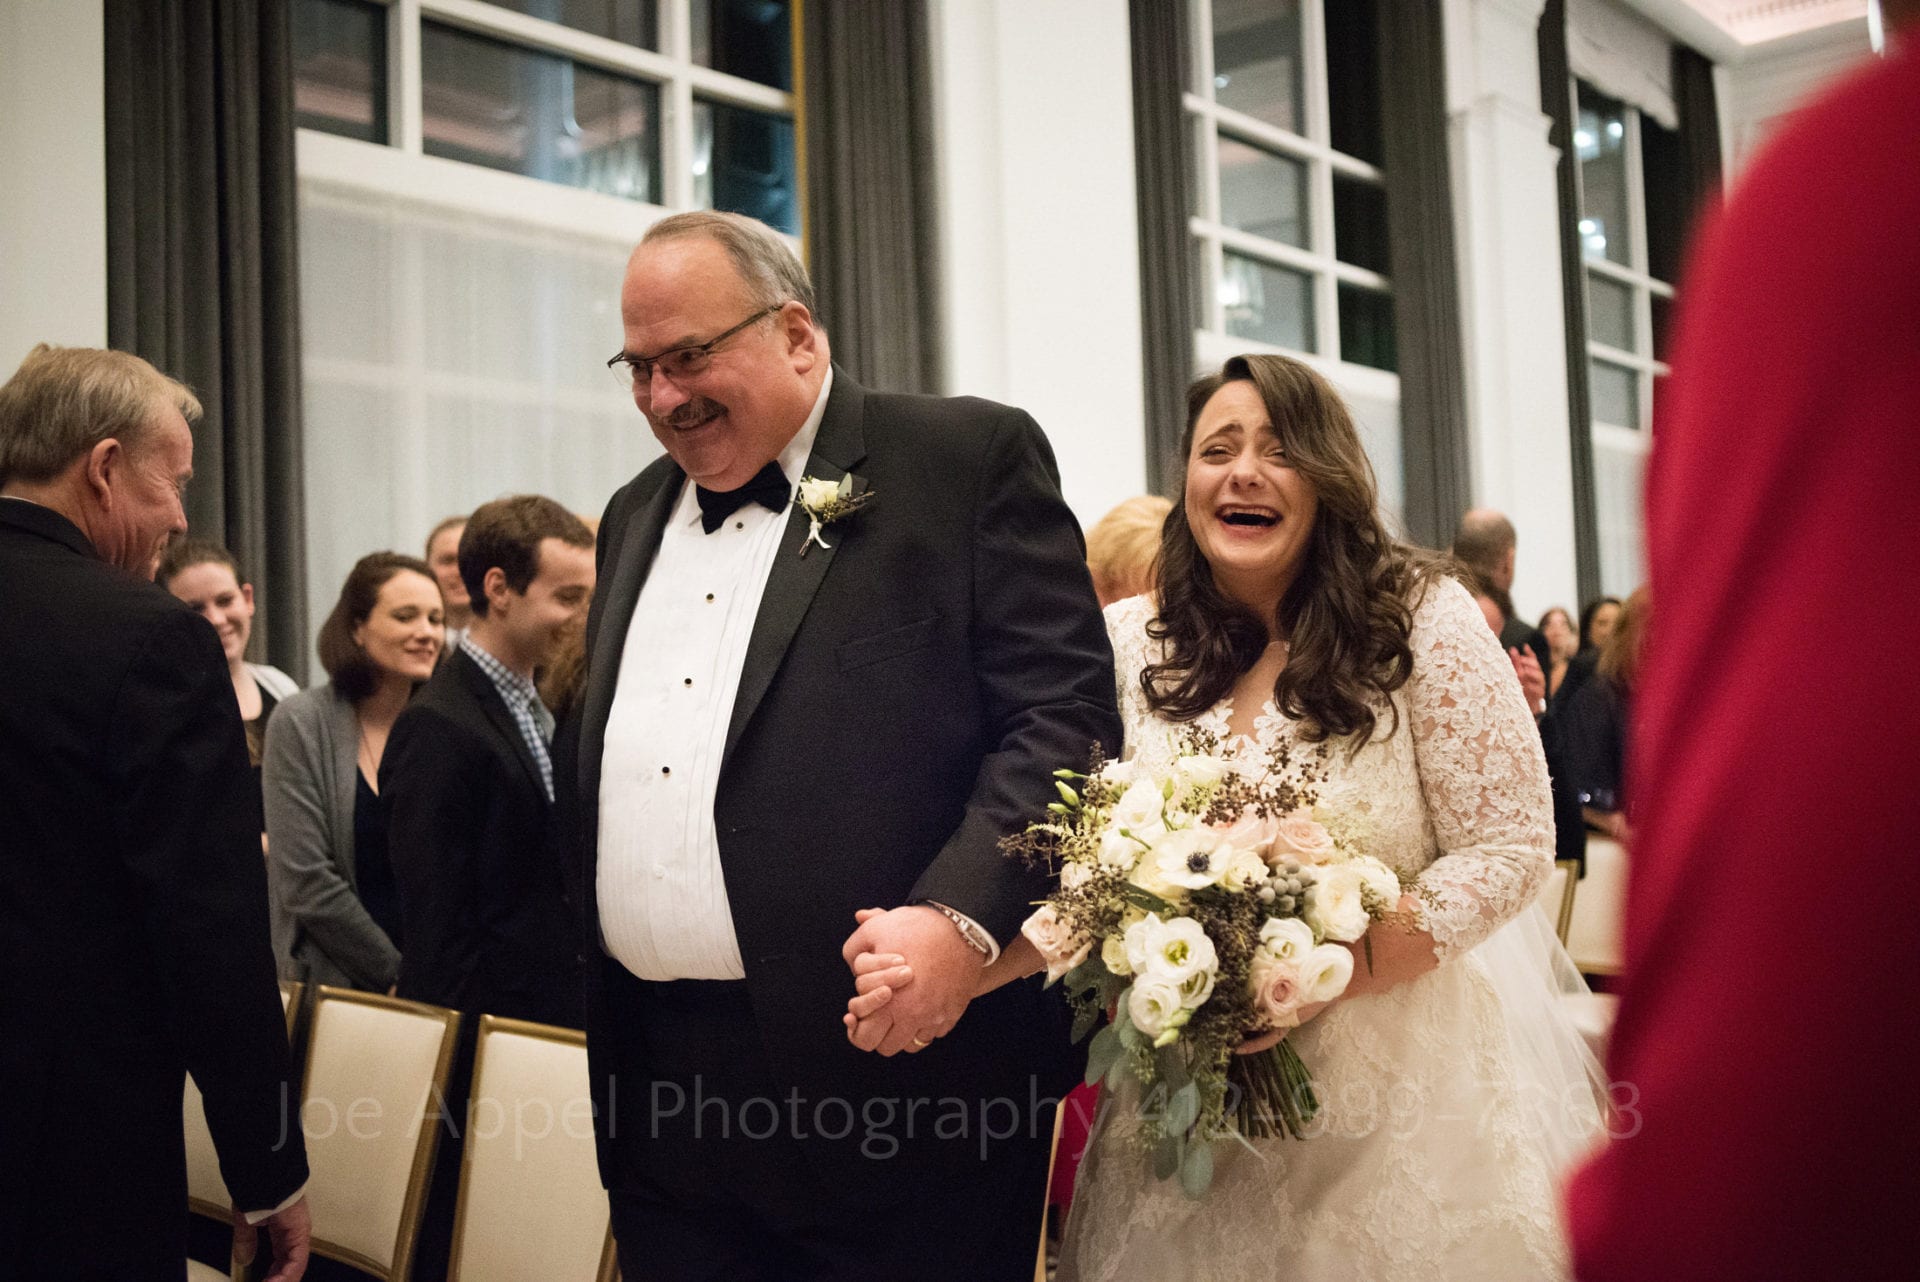 a bride smiles and carries a bouquet of pink and white poppies and roses as her father walks her down the aisle